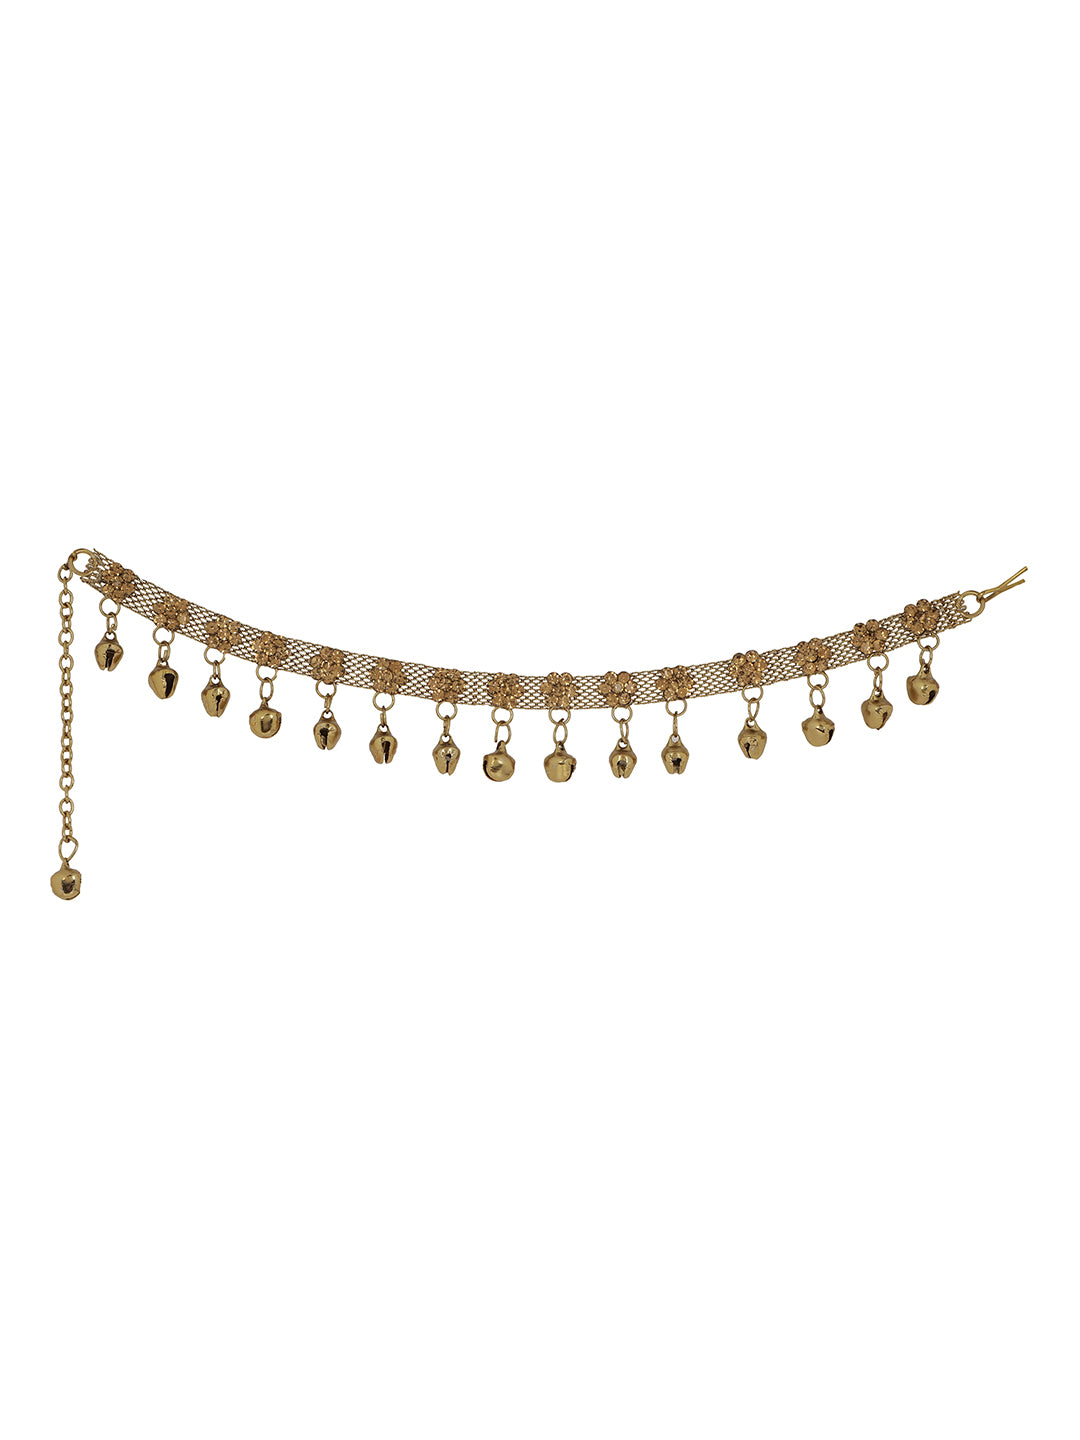 Women's Gold Plated Traditional Ghungroo Anklet/ Payal For Bridals - Anikas Creation